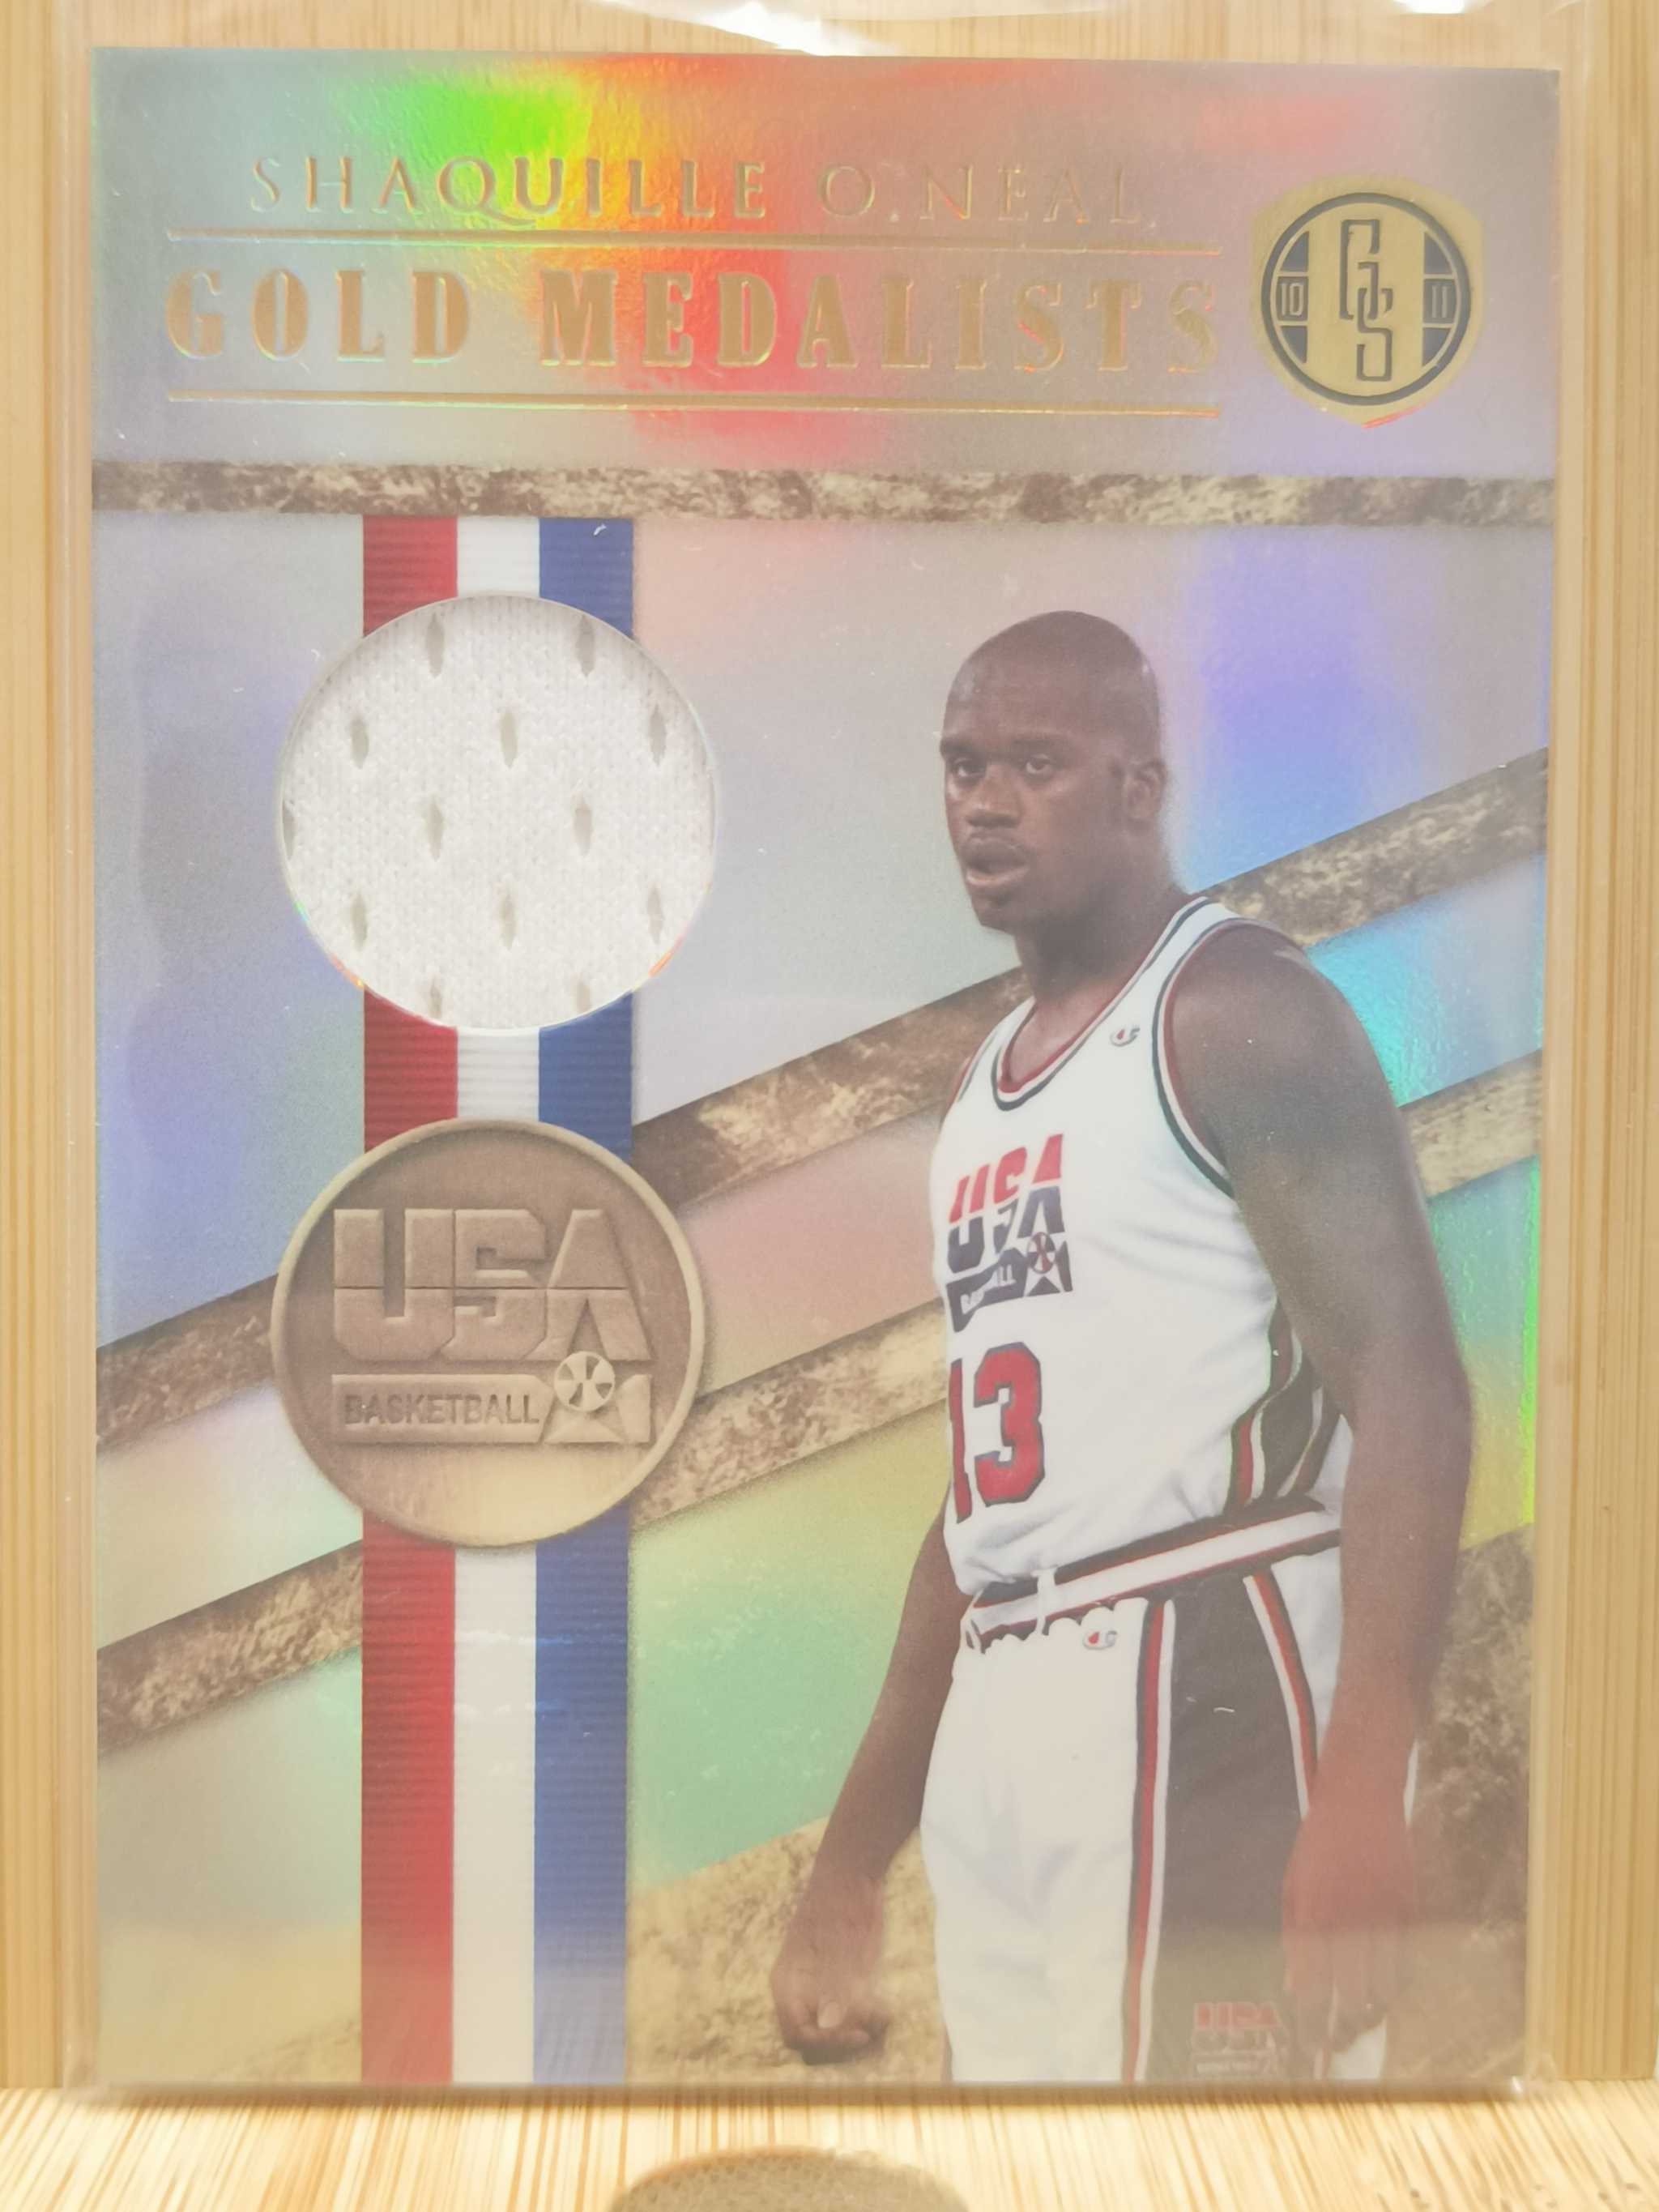 2010-11 Panini Gold Medalist Shaquille O'Neal Jersey /299 TEAM USA